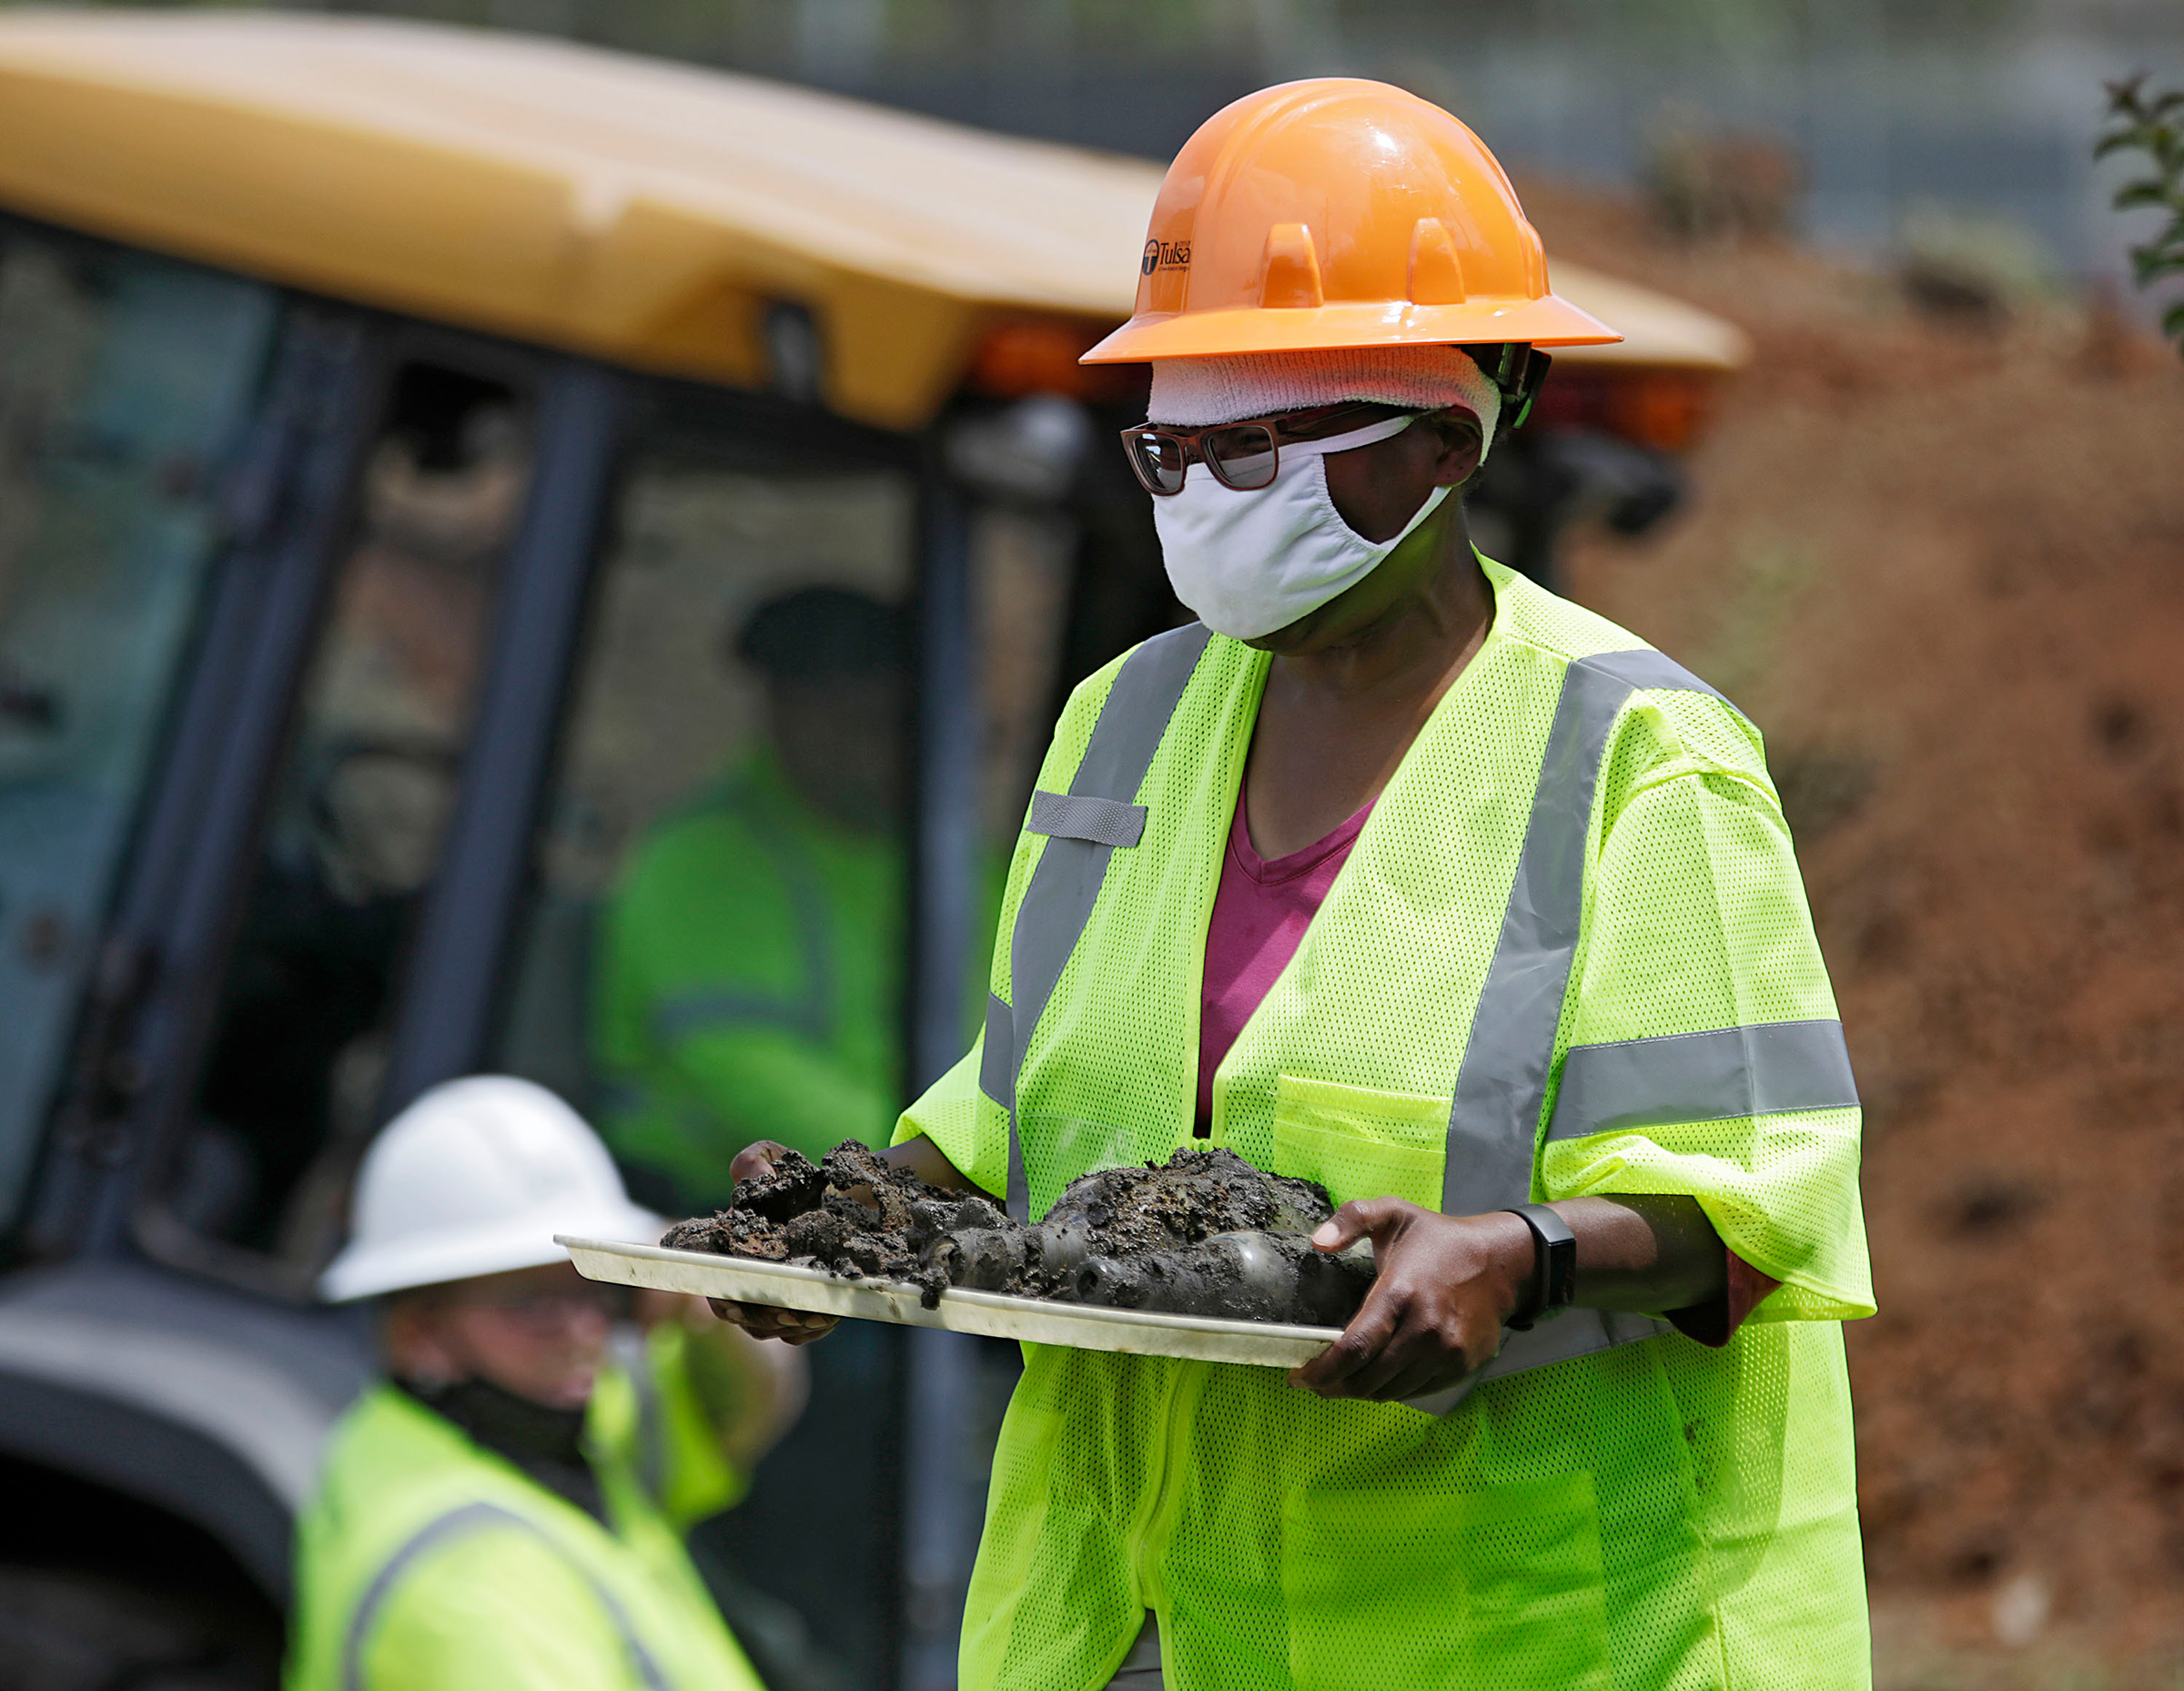 Forensic anthropologist Phoebe Stubblefield carries a tray of items found at Oaklawn Cemetery during a test excavation in the search for possible mass graves from the 1921 Tulsa Race Massacre in Tulsa, Okla on July 21, 2020.